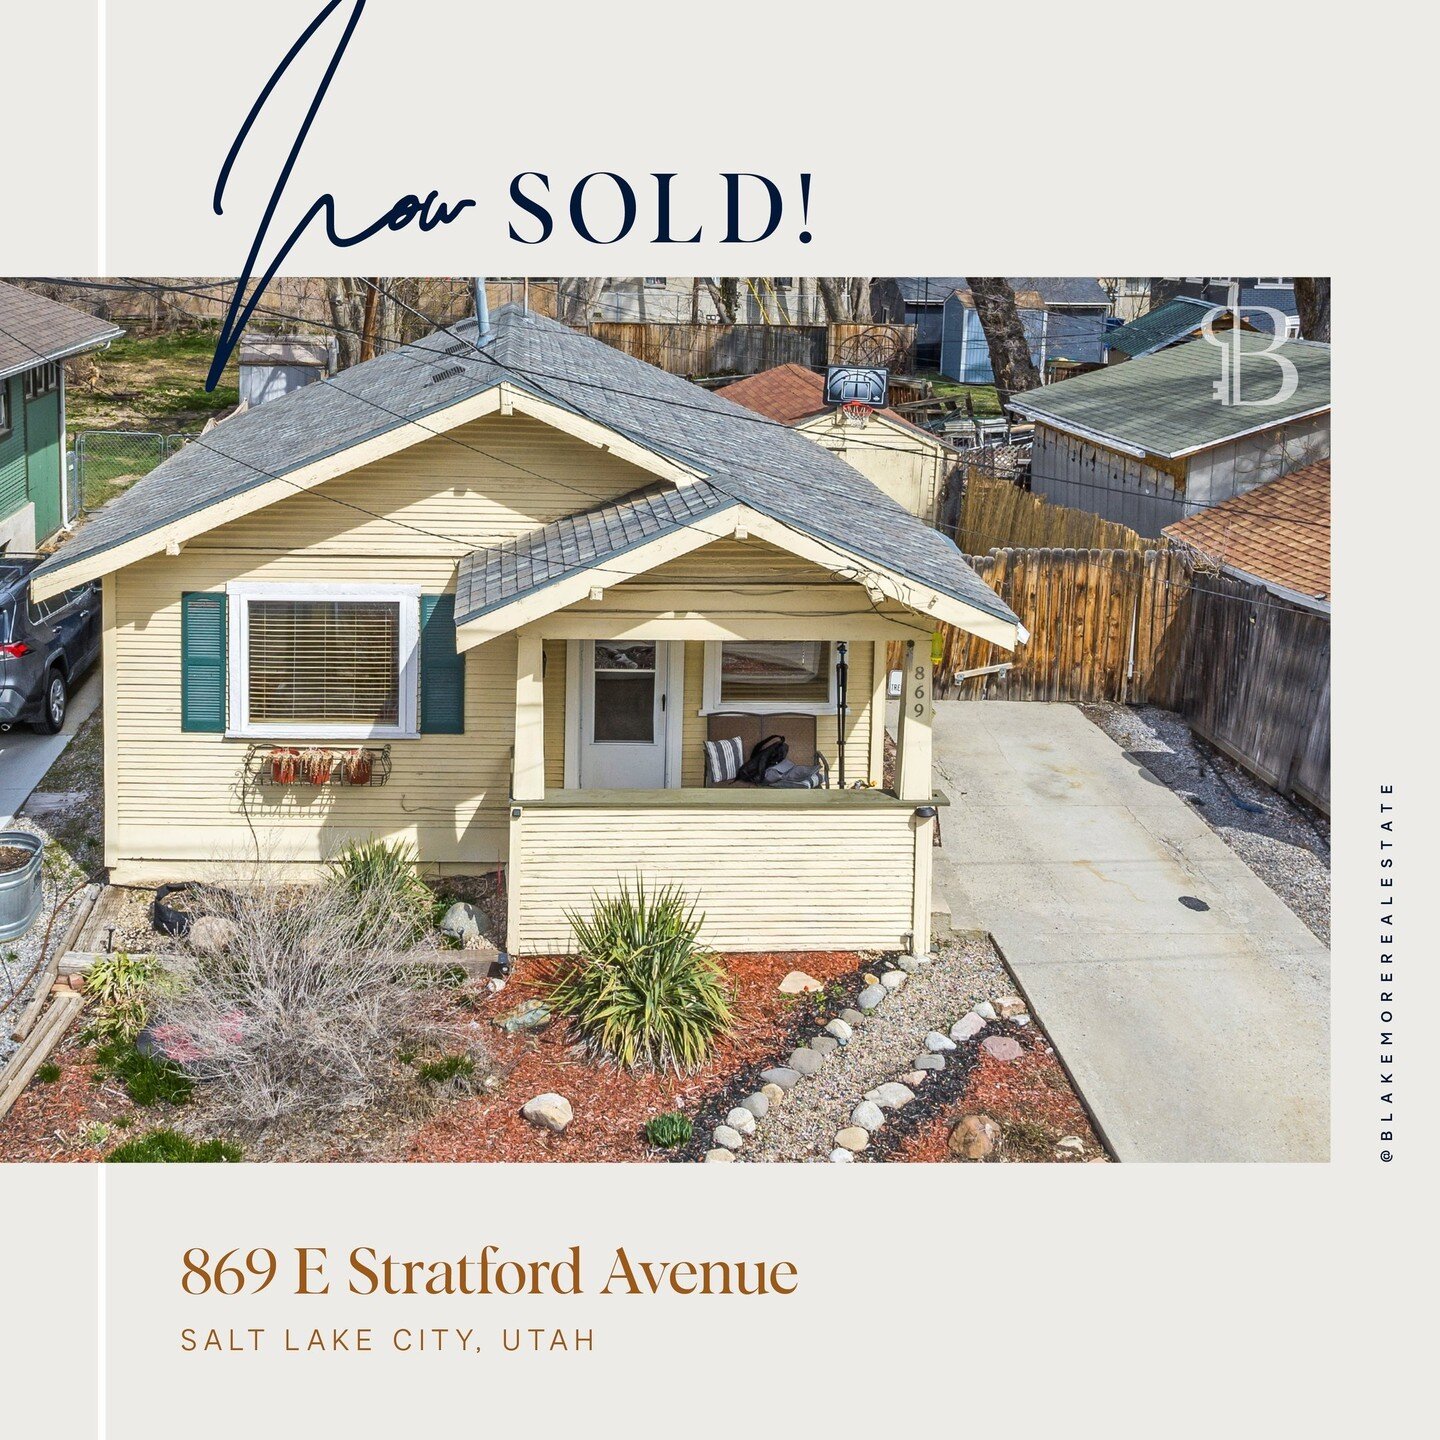 Big congratulations to Amber's client for closing on the sale of their home! 👏⁠
⁠
⁠
⁠
⁠
⁠
⁠
⁠
⁠
&mdash;&mdash;&mdash;&mdash;&mdash;&mdash;&mdash;&mdash;⁠
#utah #utahhomes #utahgram #realestate #saltlakeliving #slcrealestate #slc #utahrealtor #forsal